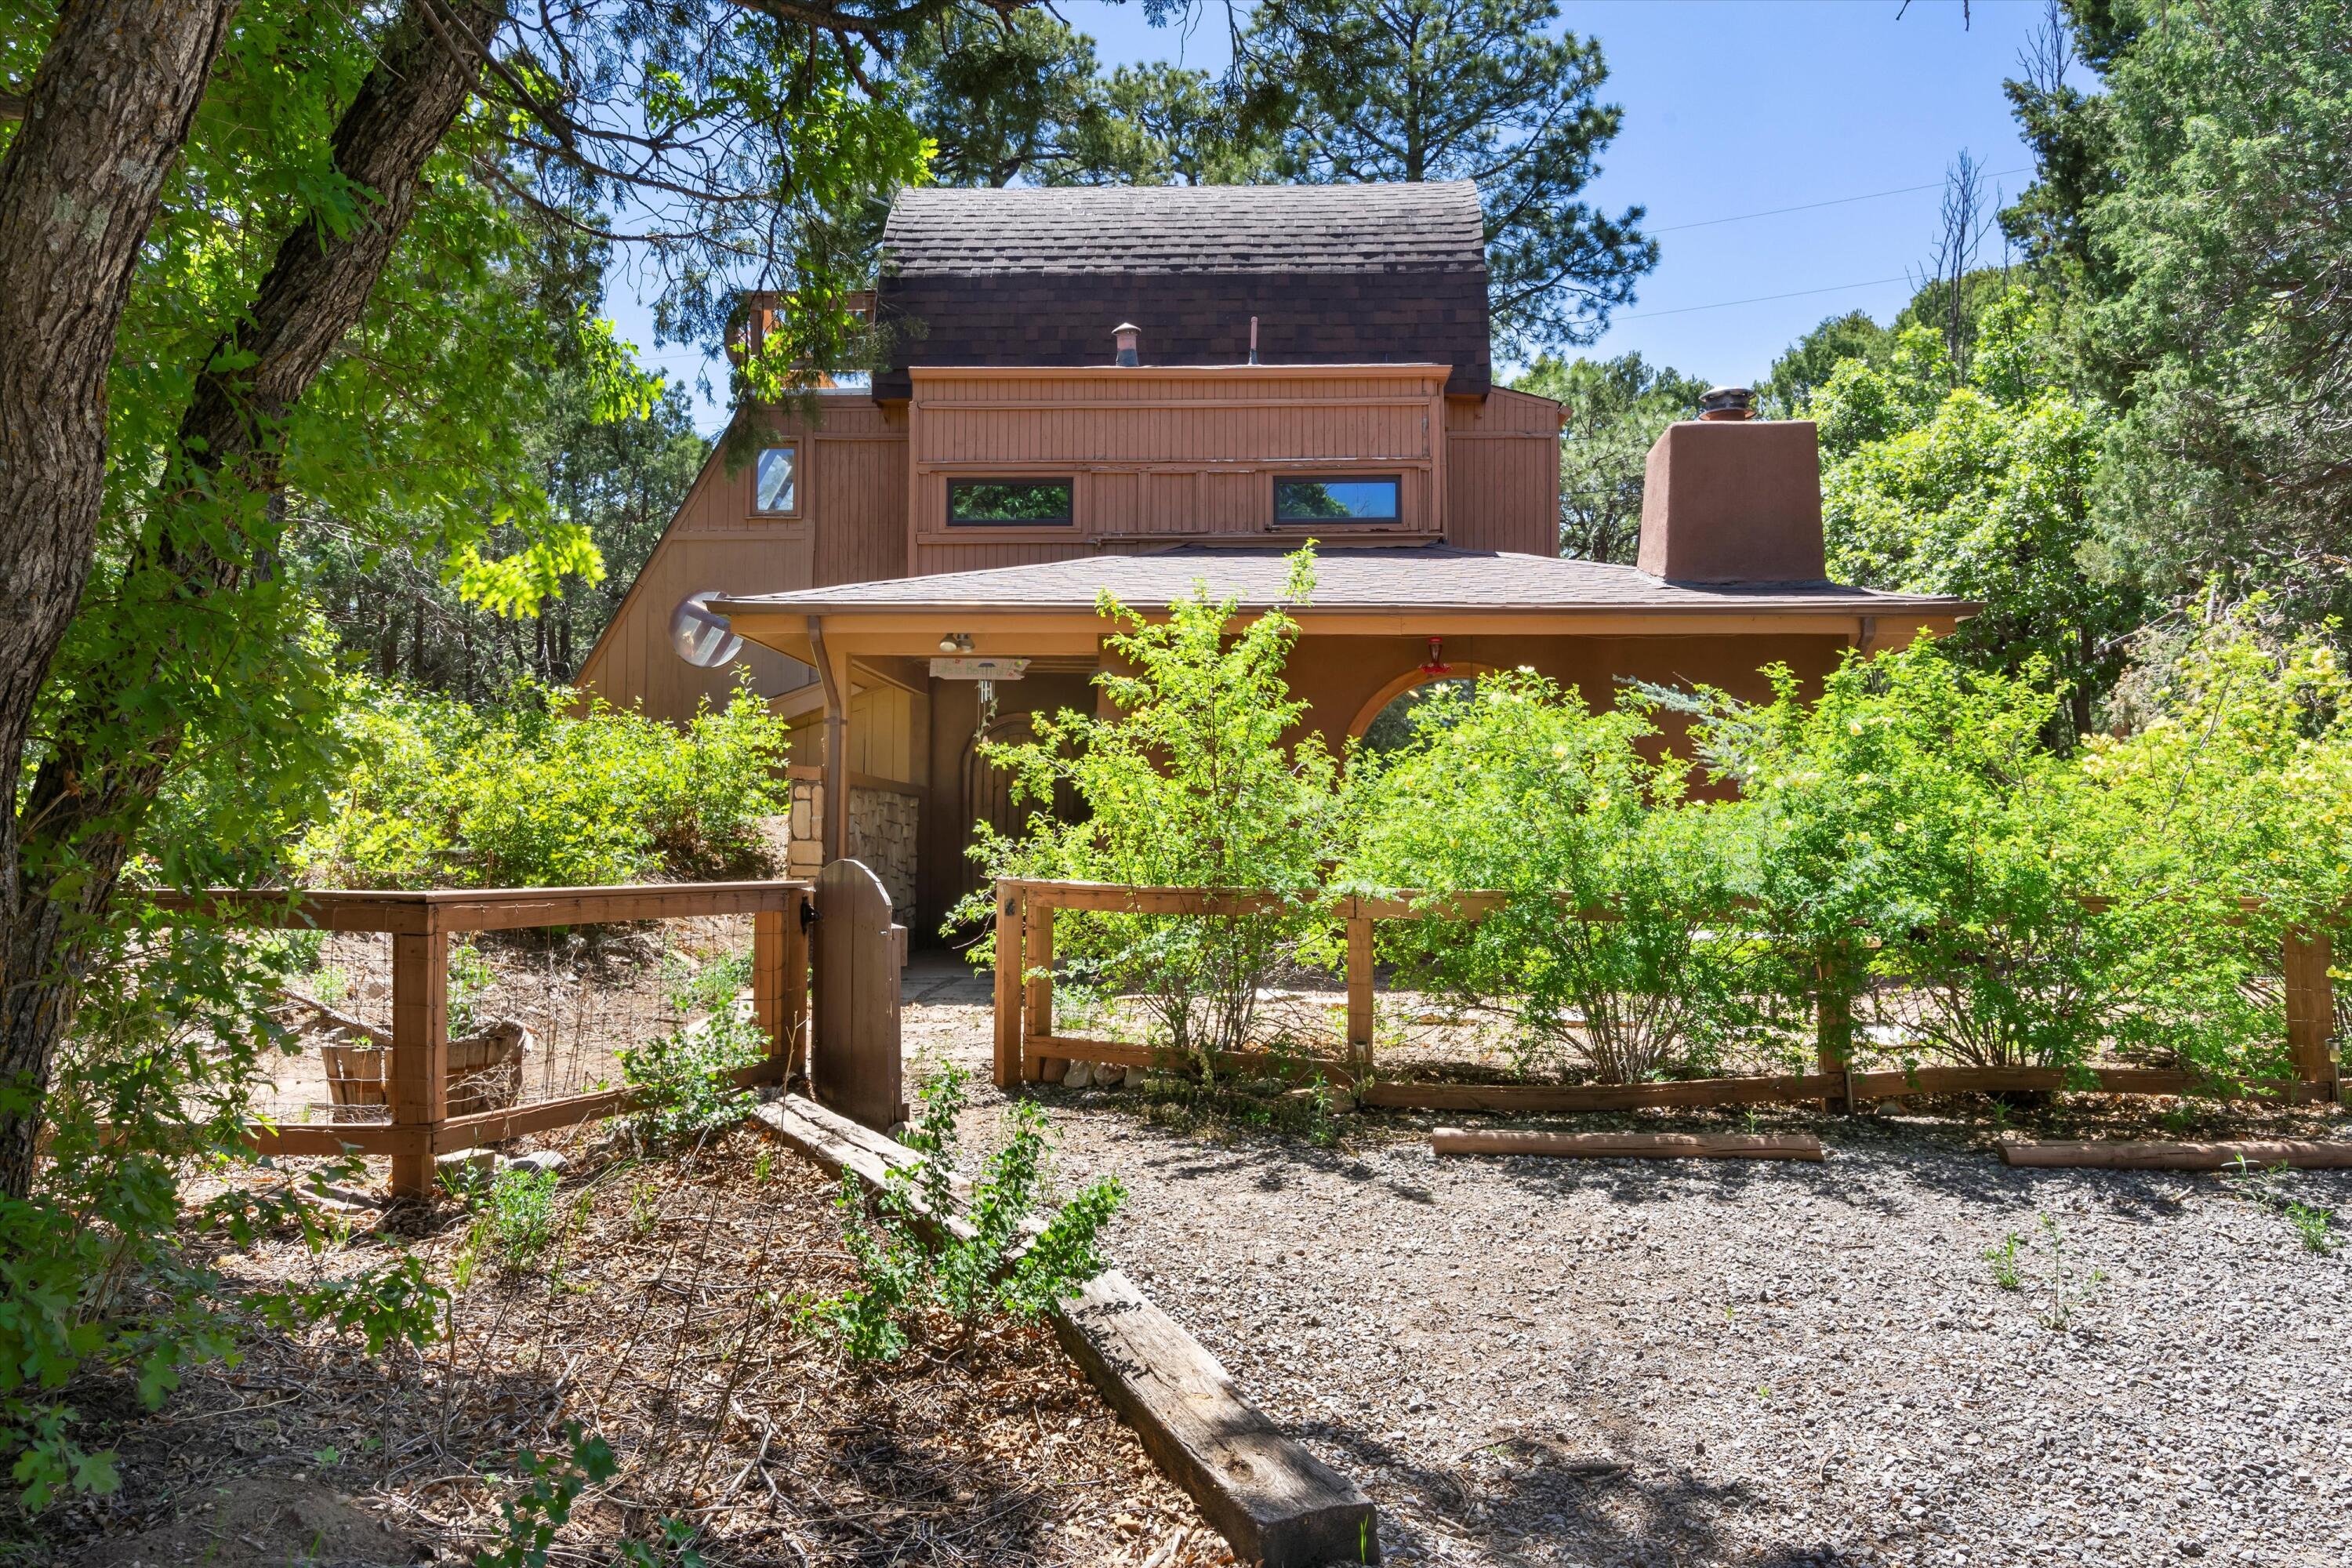 Escape to tranquility in this enchanting Warm & Cozy Tijeras Hideaway, where comfort meets convenience with Quick & Easy Access to ABQ! Nestled on a sprawling 1-acre wooded lot, this presents a Rare Opportunity to own a truly Unique home in the East Mountains.